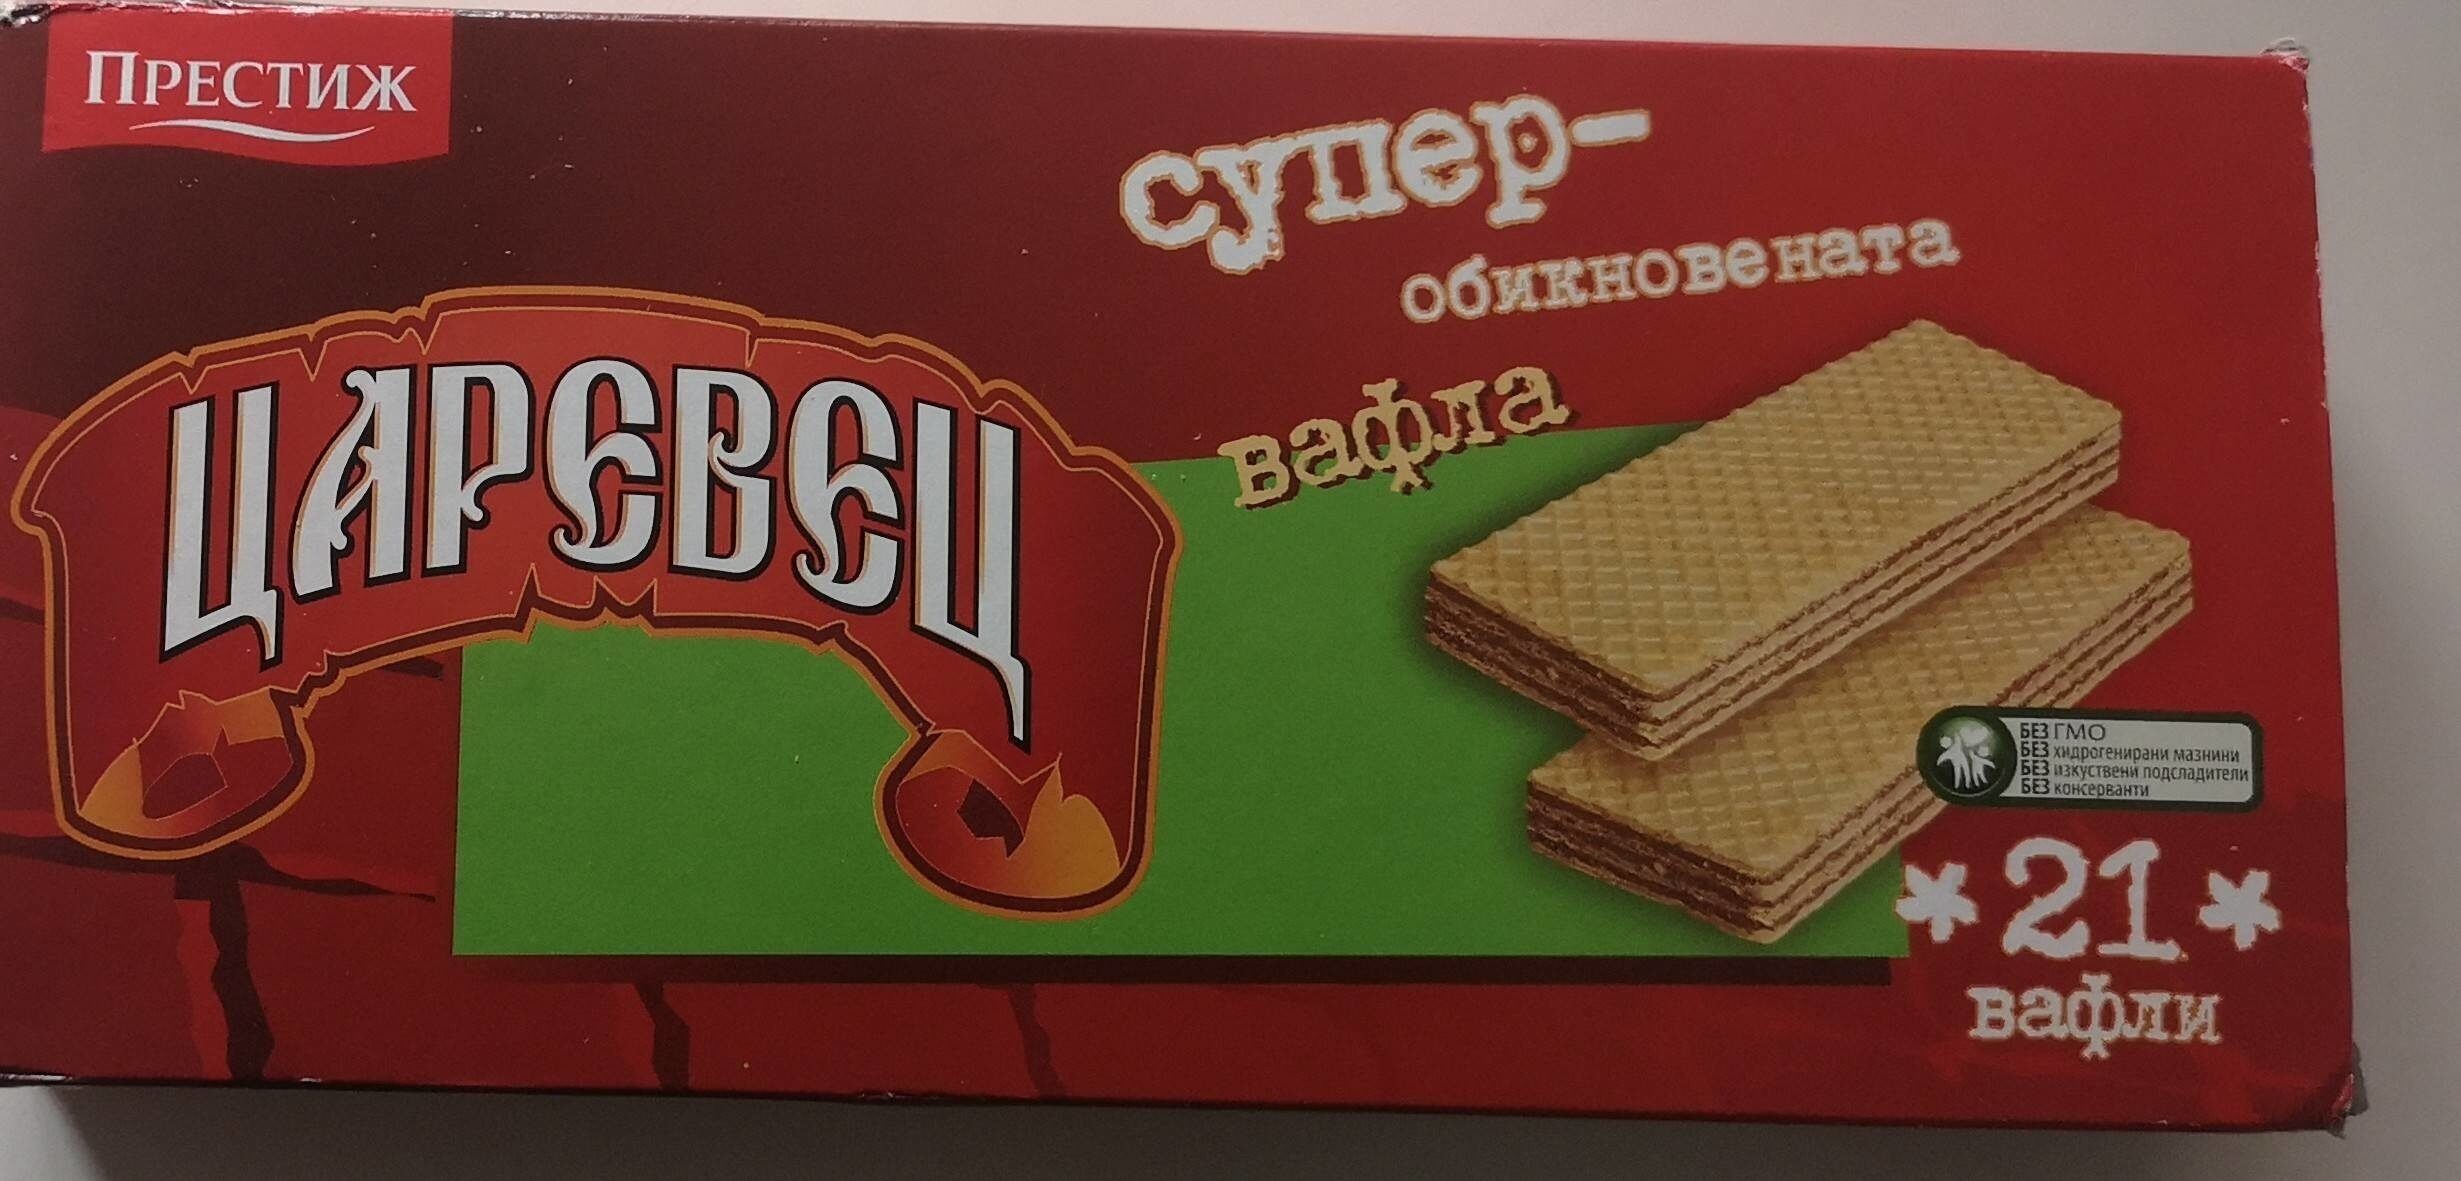 Non-coated wafers - Produkt - bg